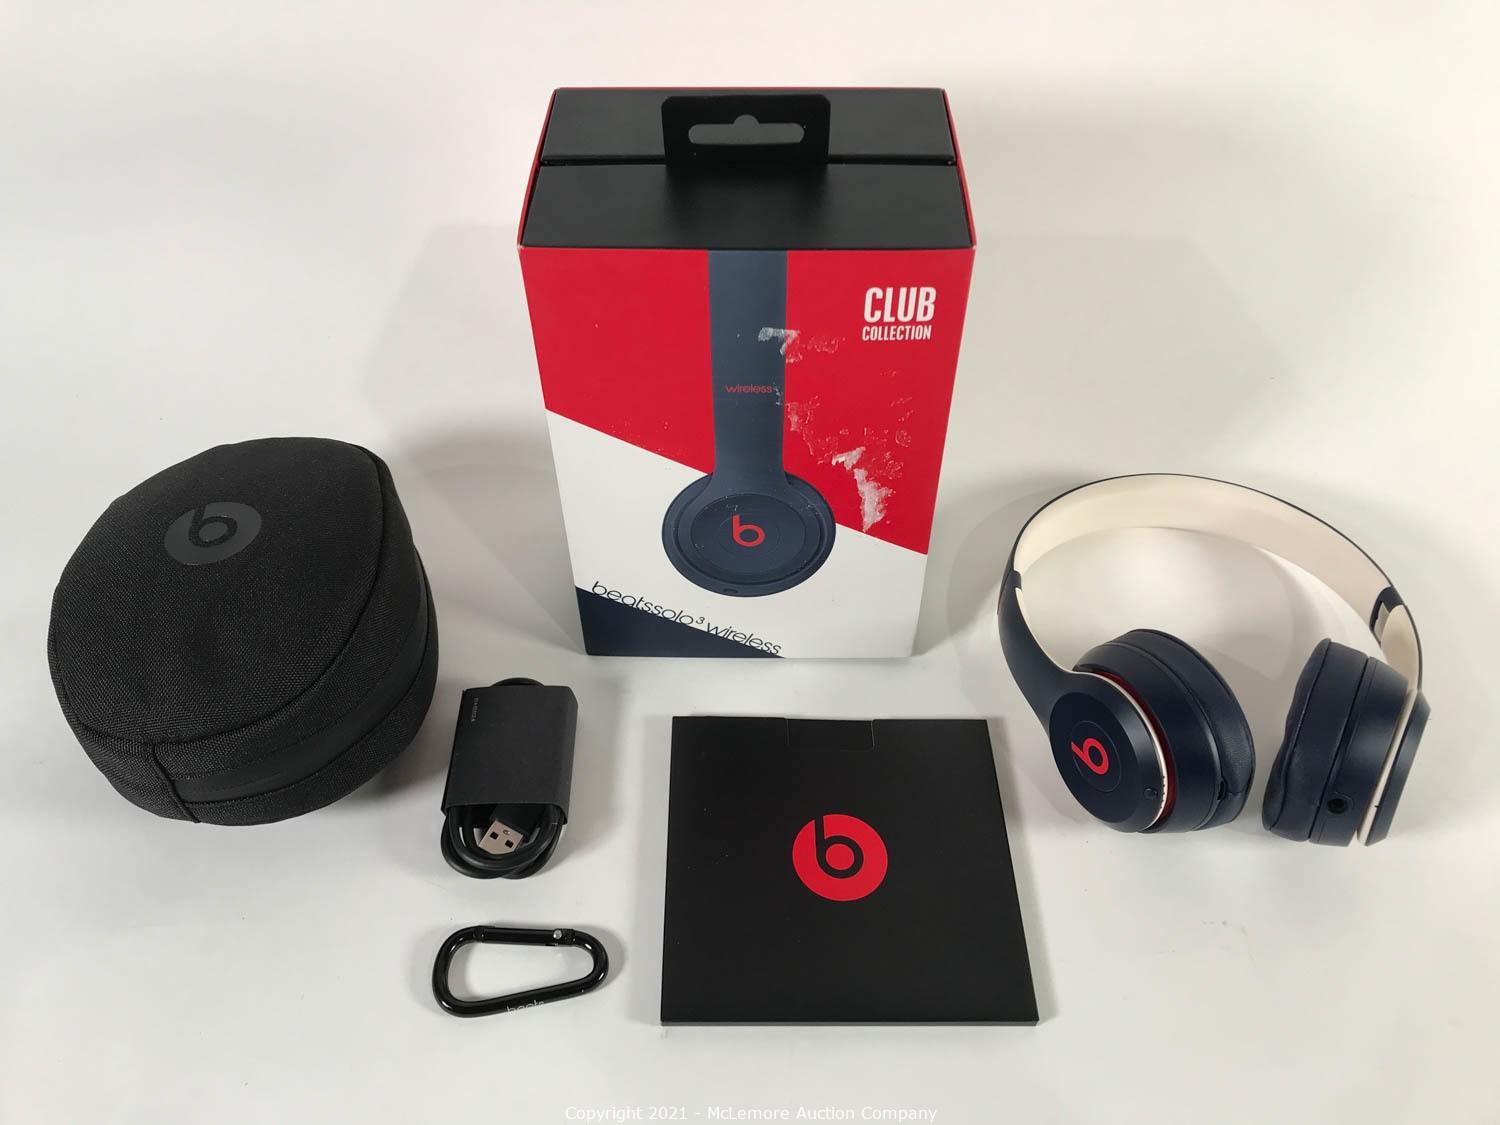 McLemore Auction Company - Auction: Electronics, Gaming, Home Goods, Beauty  Products, Toys, Power Tools, Clothing, Accessories, Appliances and More  ITEM: Beats Solo3 Wireless On-Ear Headphones - Apple W1 Headphone Chip,  Class 1